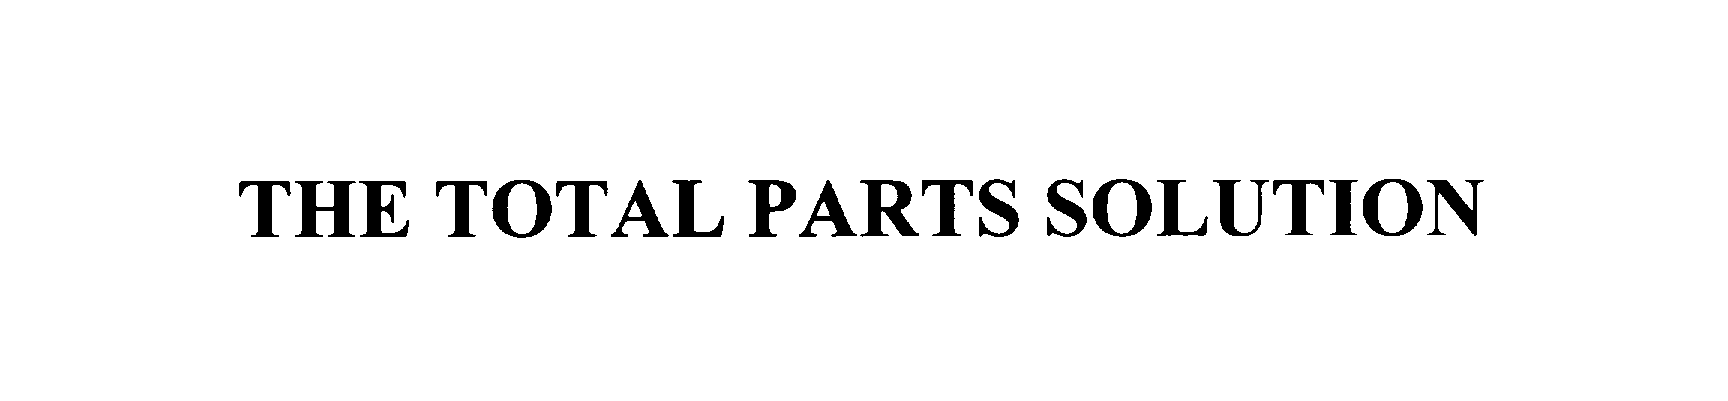  THE TOTAL PARTS SOLUTION